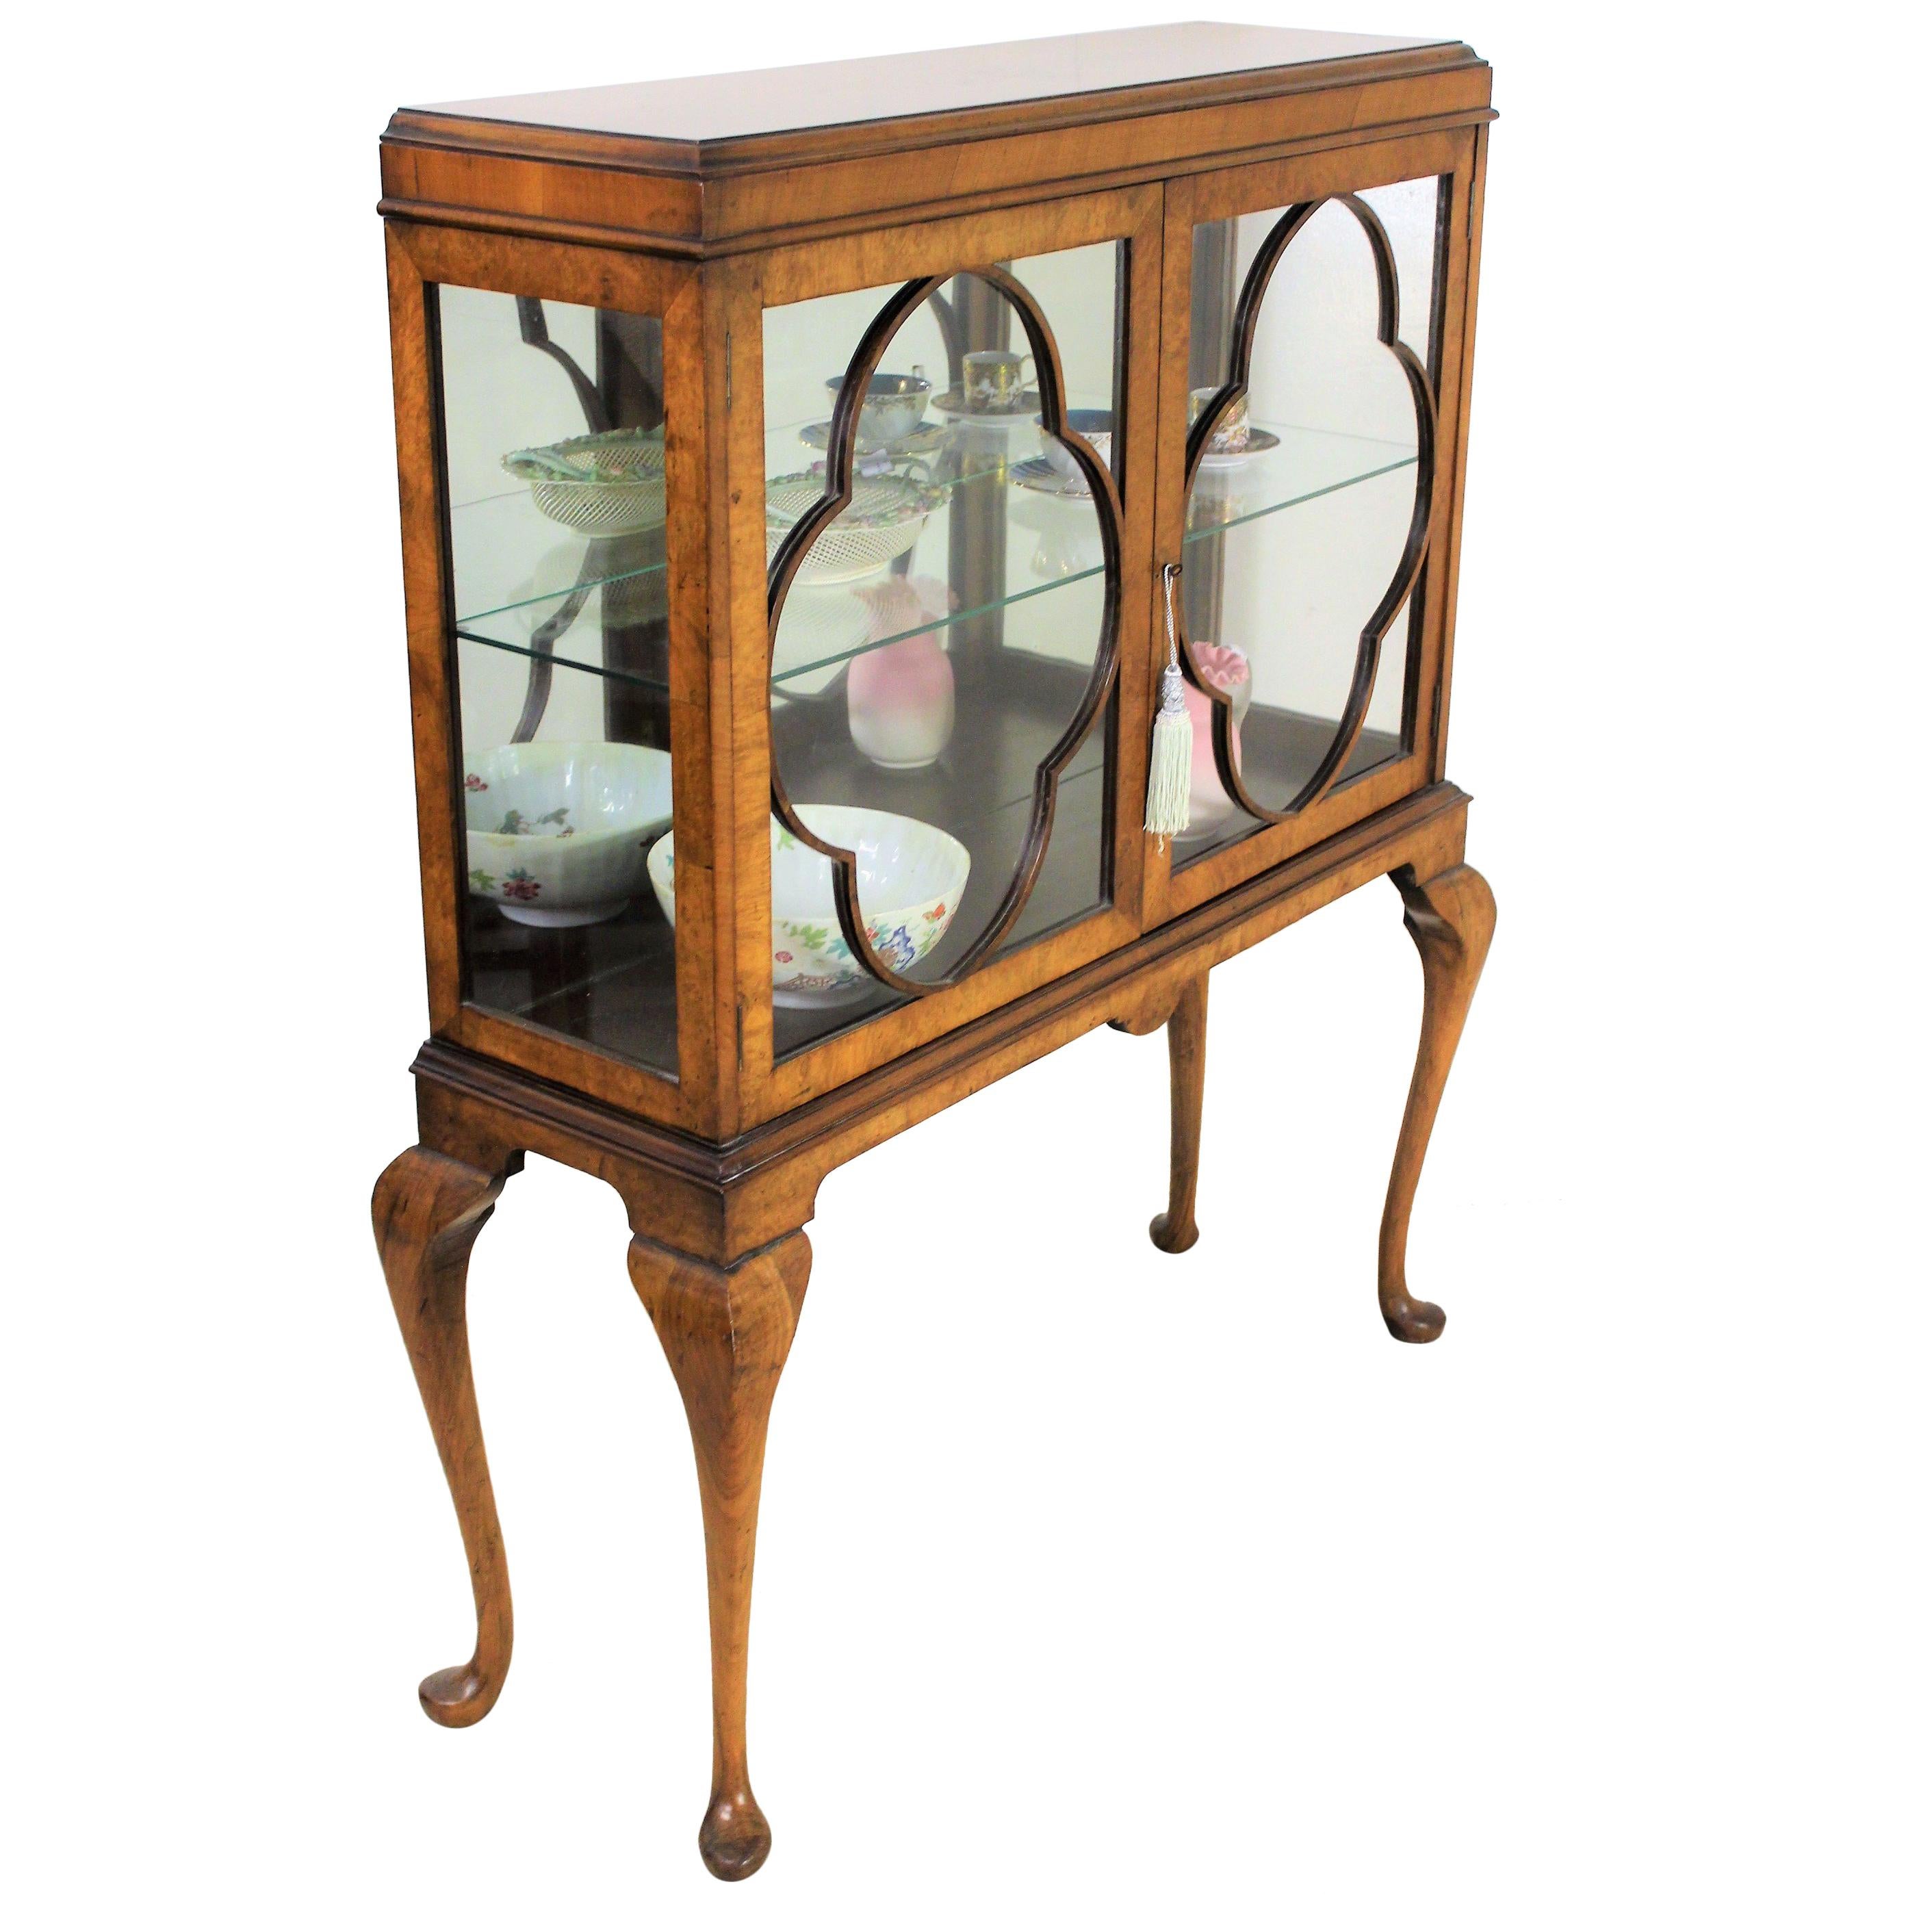 Early 20th Century Burr Walnut Queen Anne Style Display Cabinet